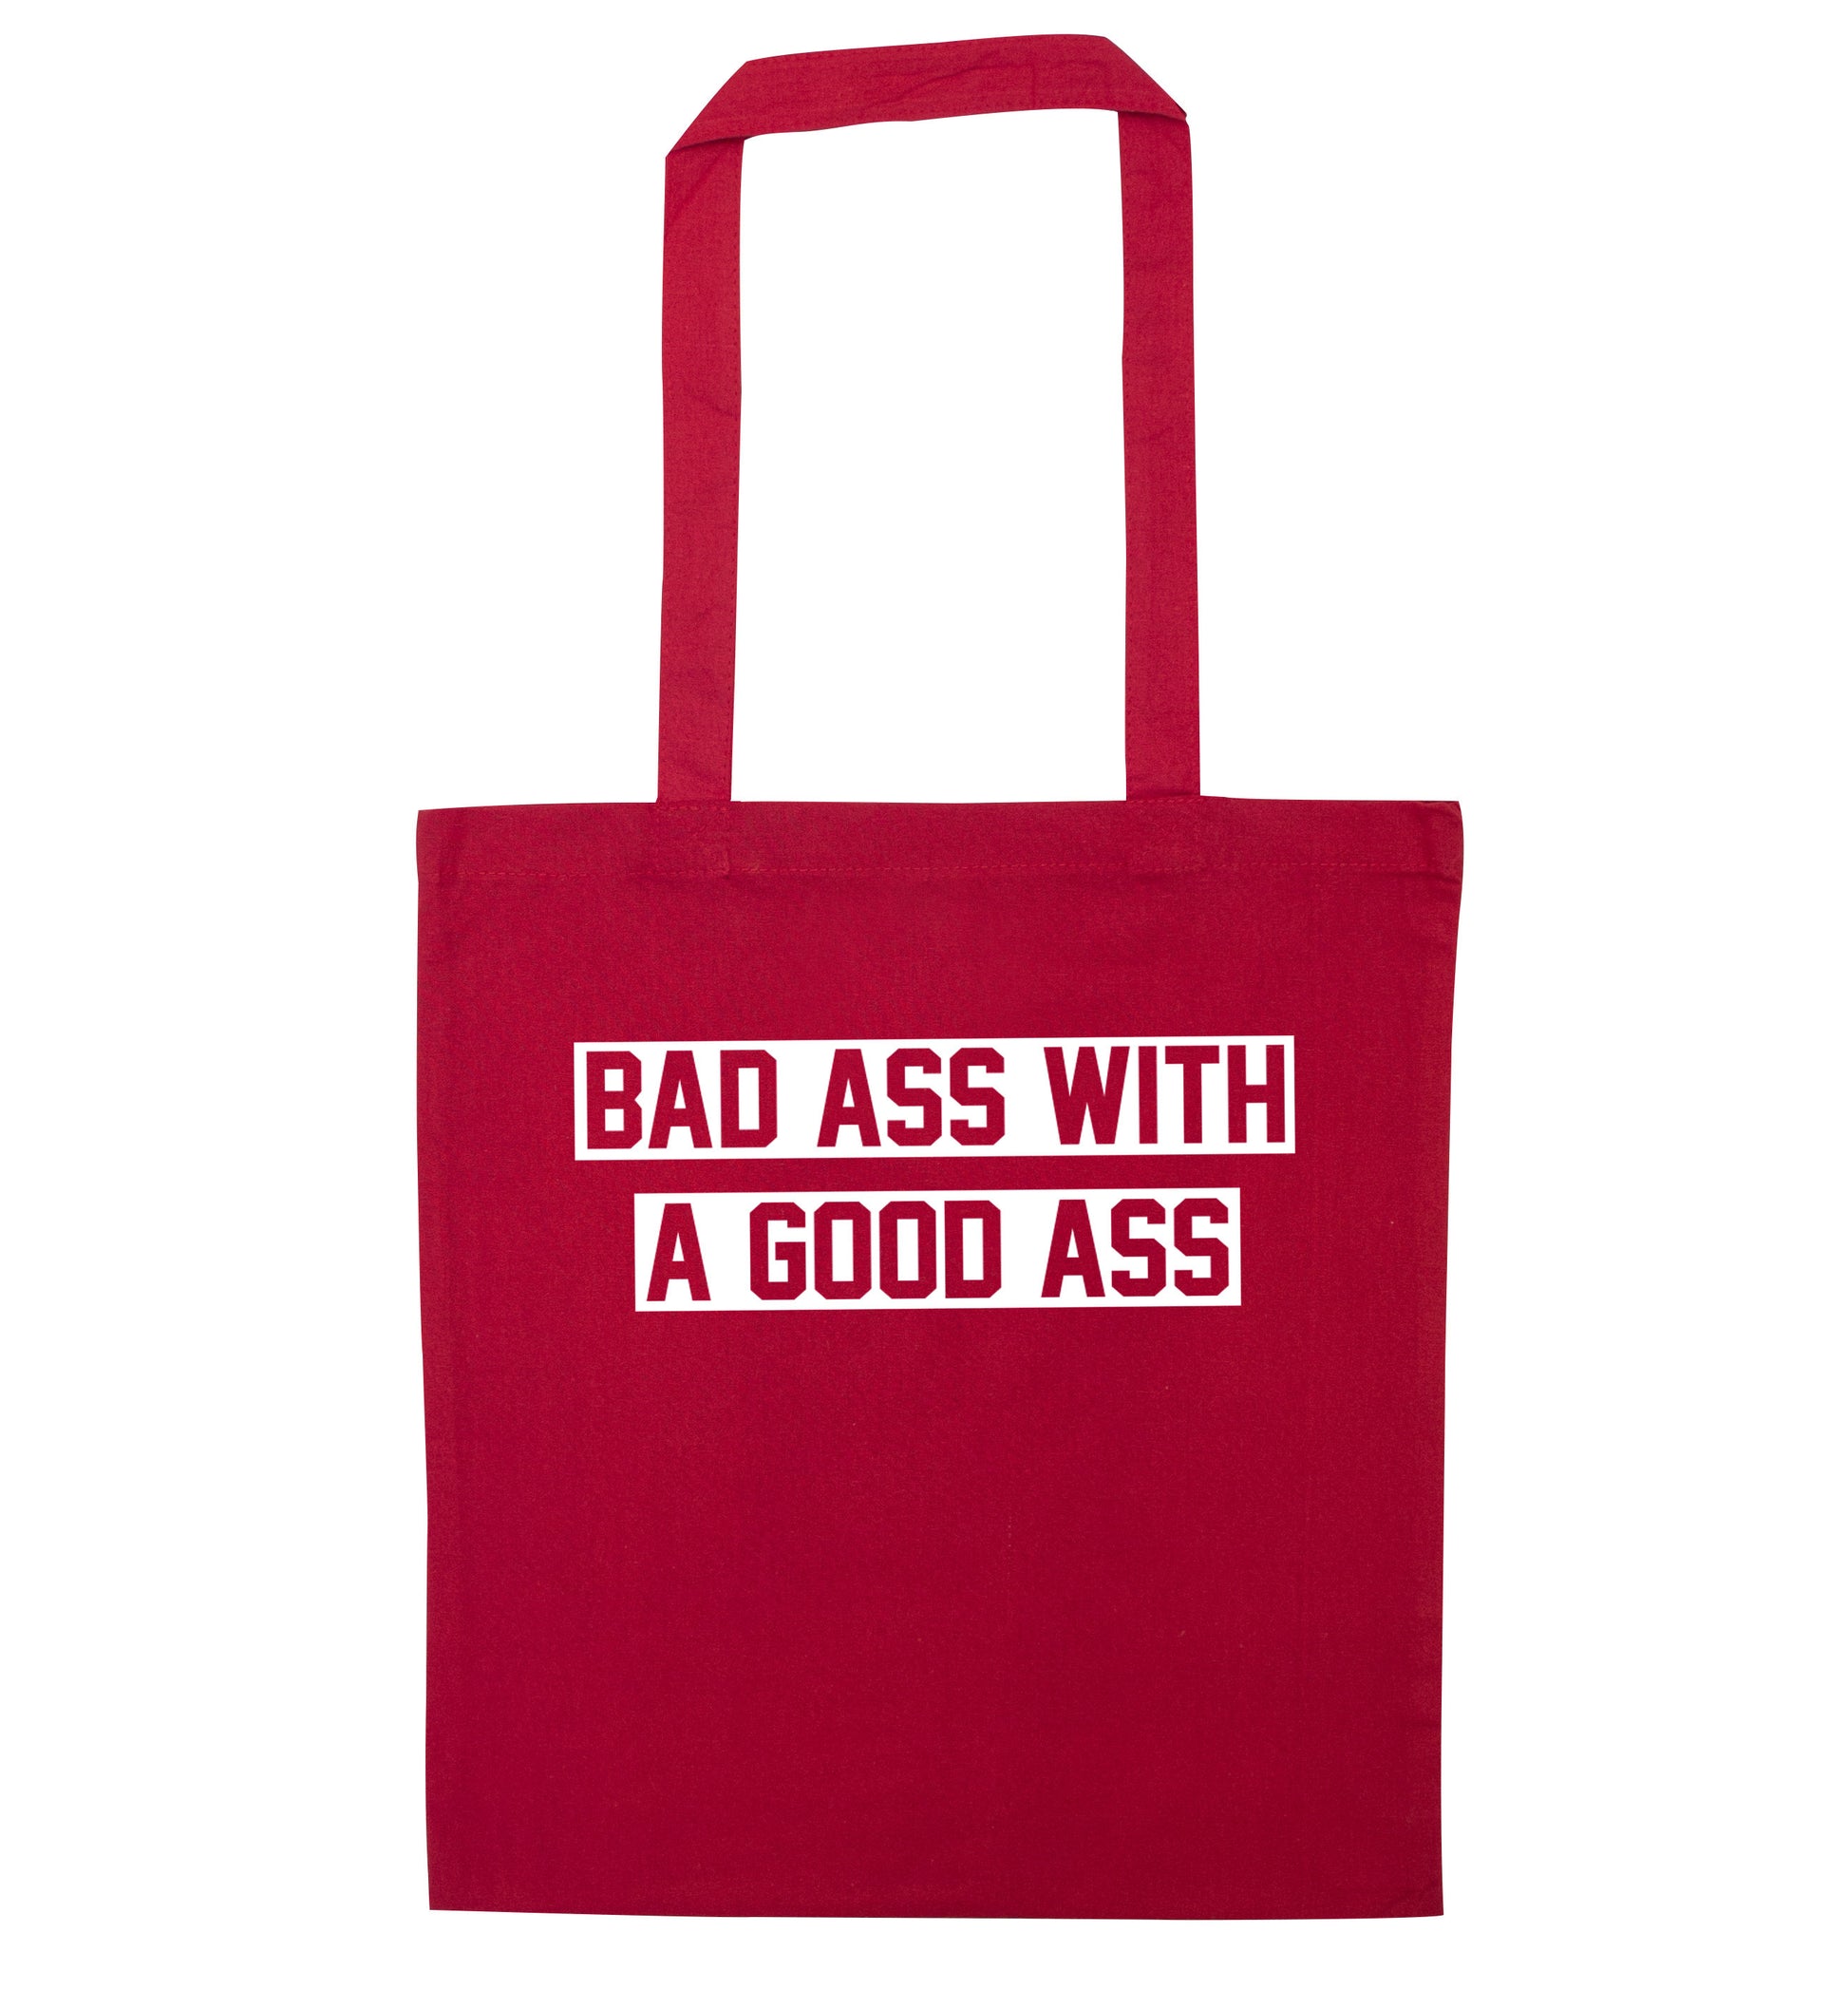 A bad ass with a good ass red tote bag